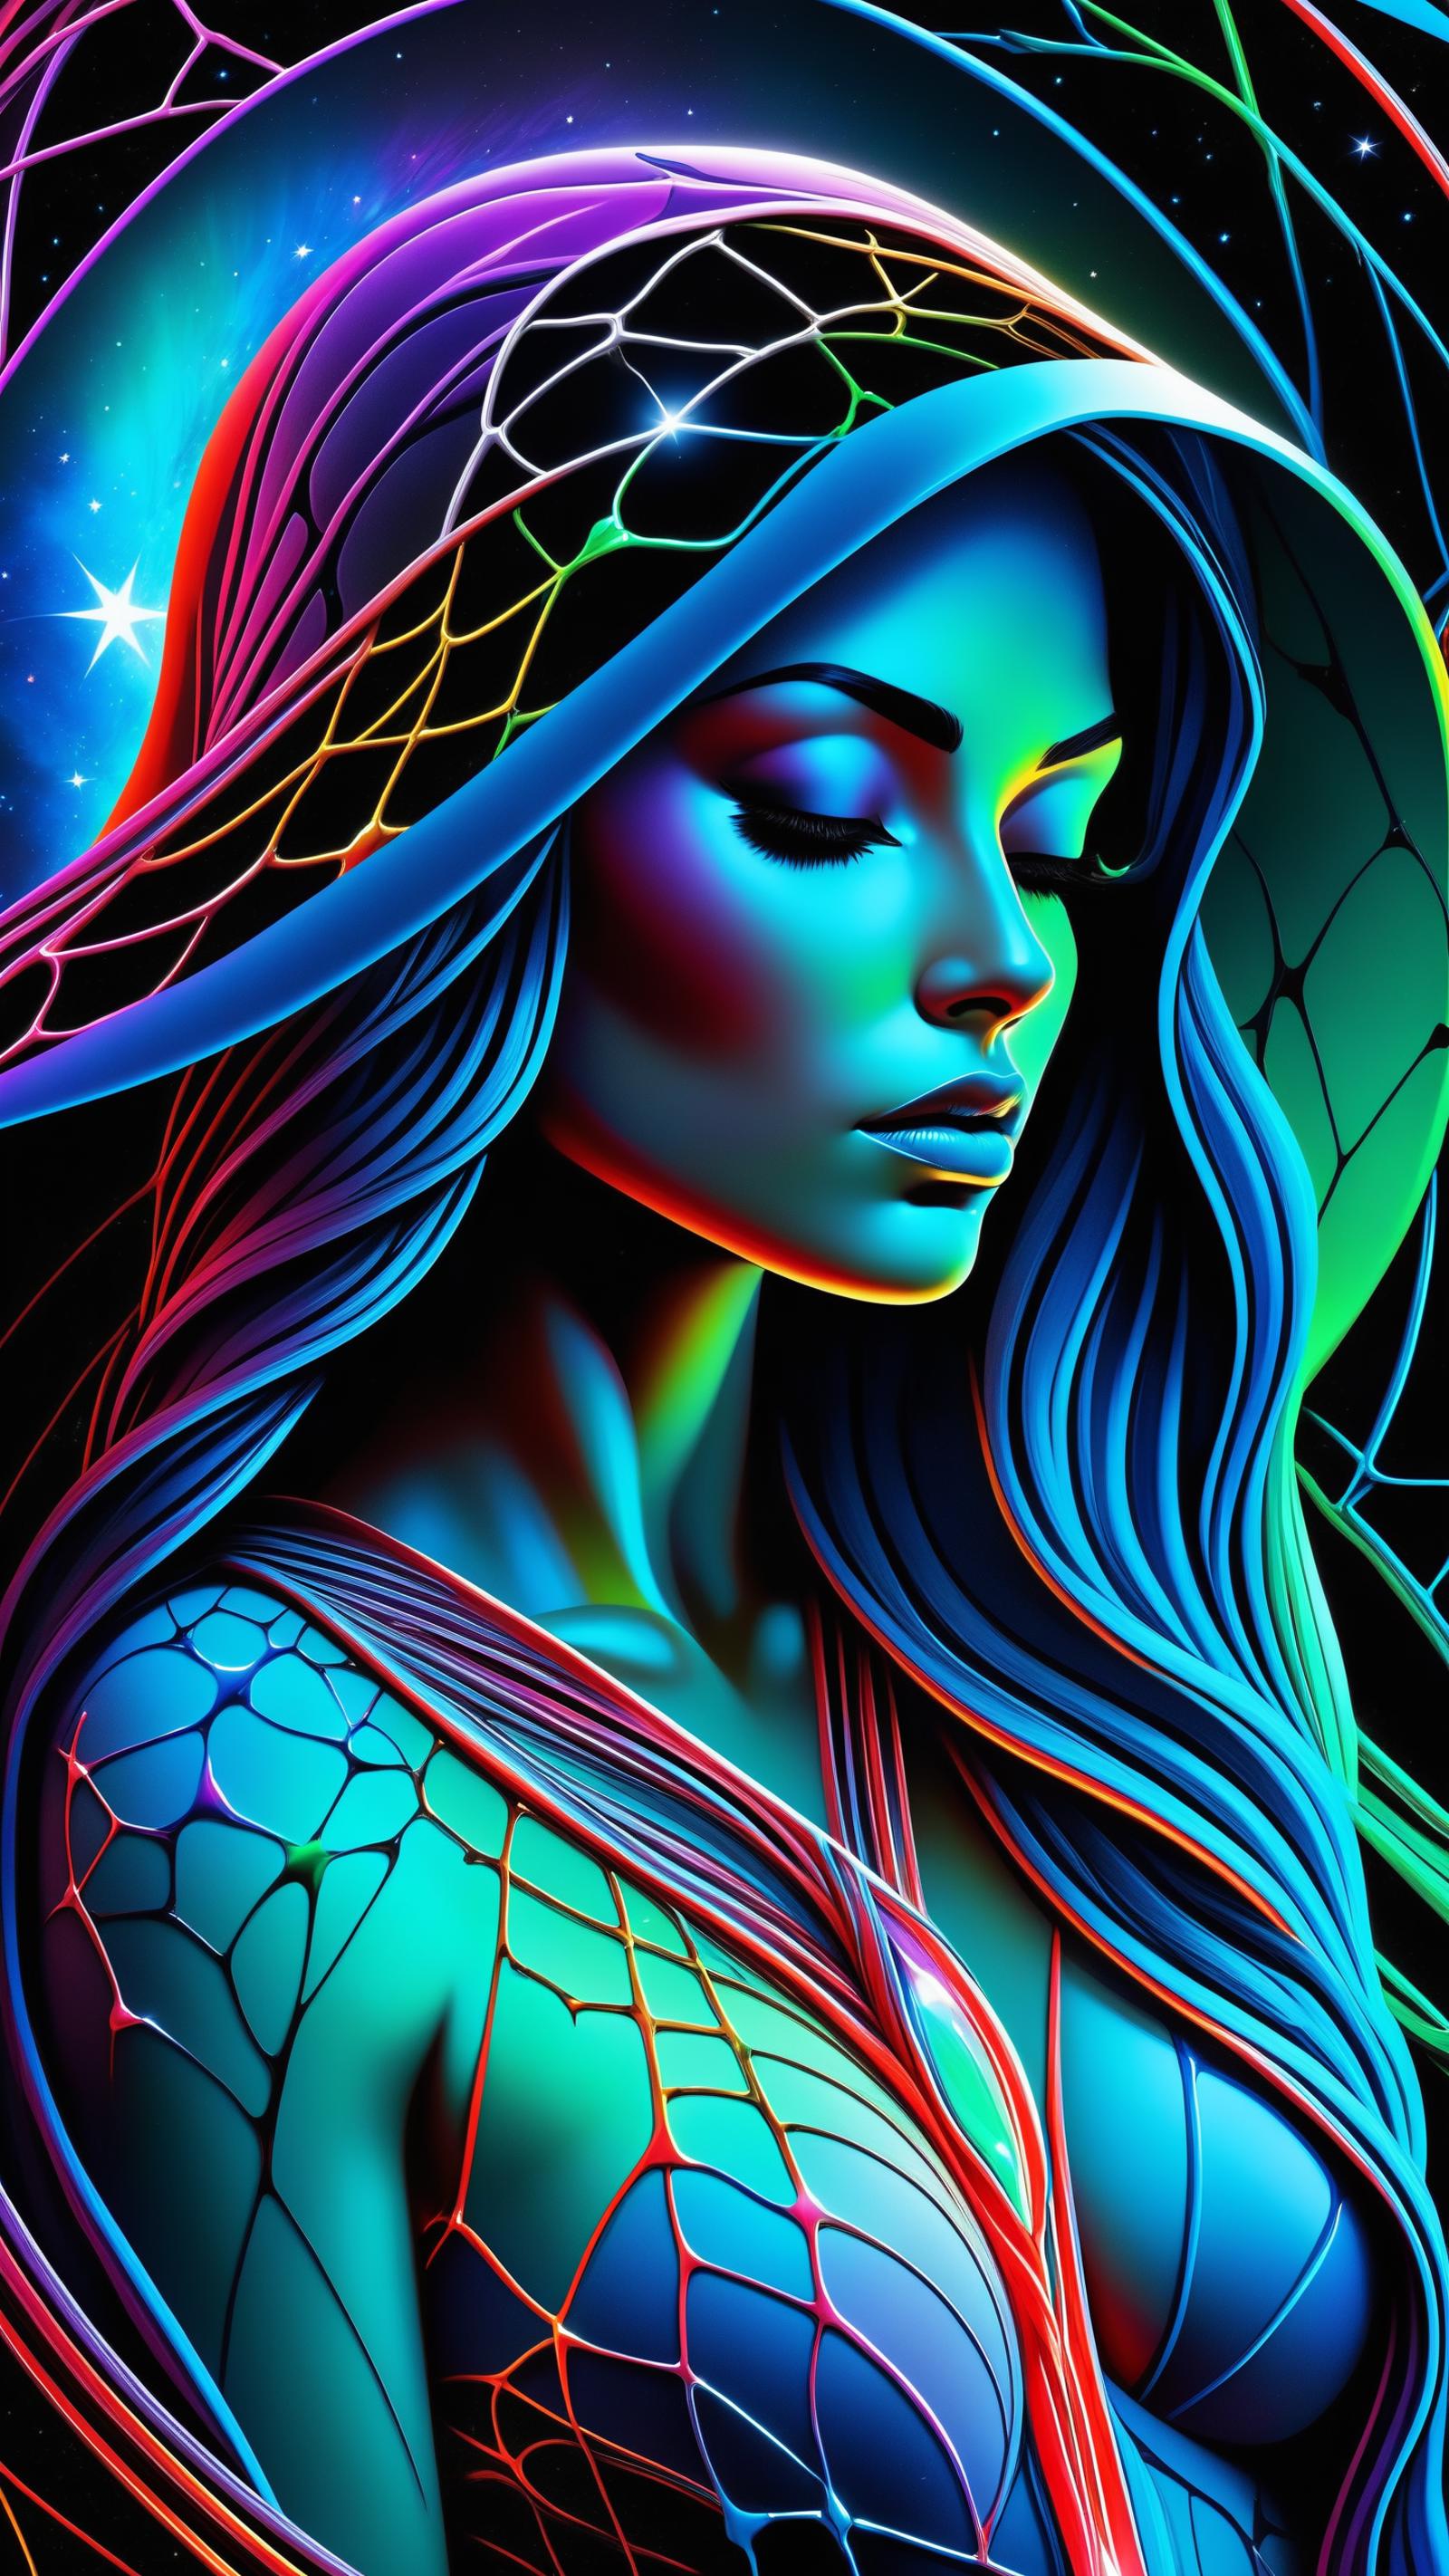 A vibrant and colorful painting of a woman with long hair.